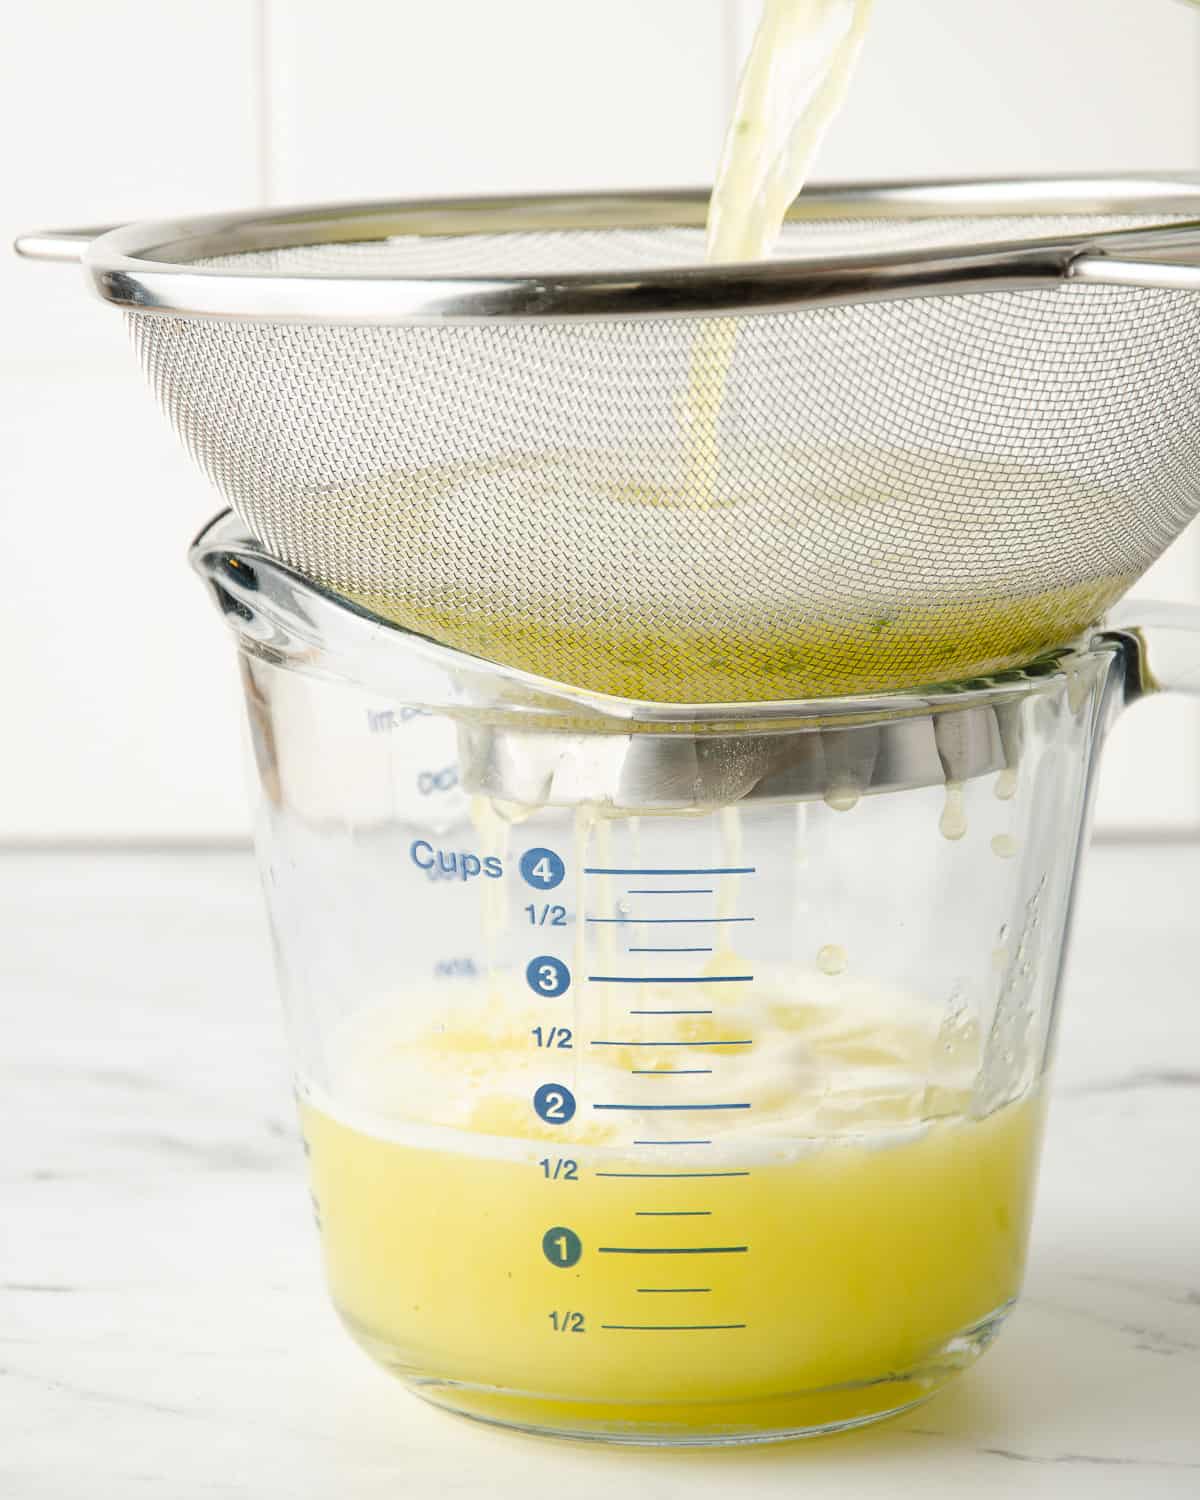 Straining pineapple water through a sieve into a large measuring cup.